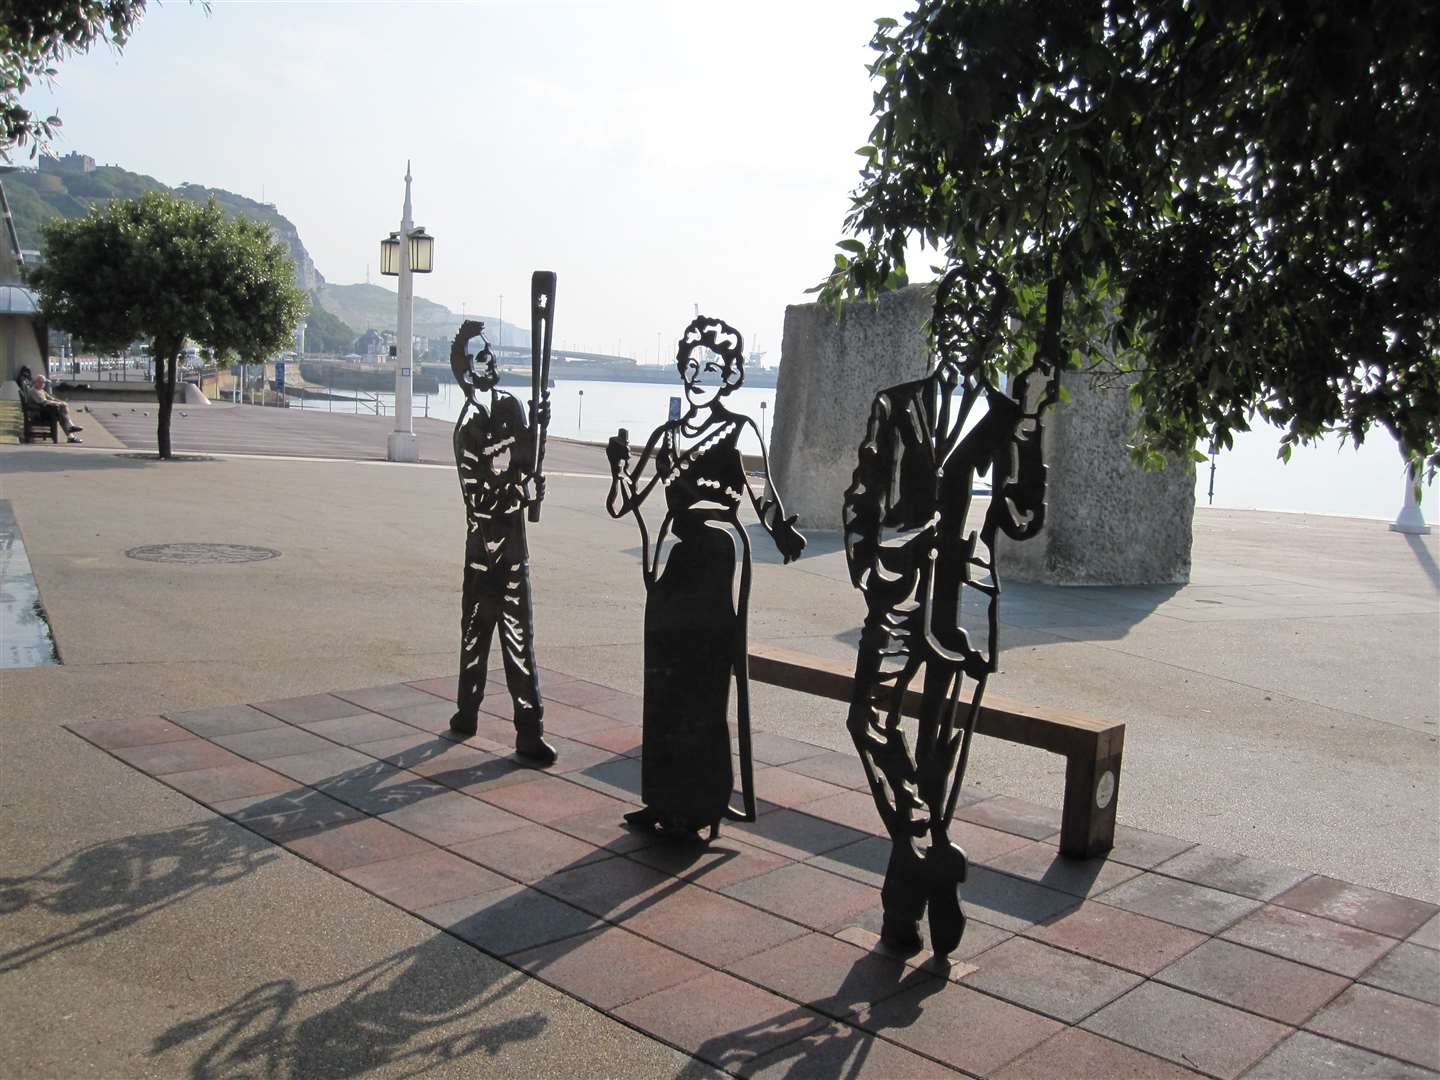 The three figures with the Portrait bench are Jamie Clark, Dame Vera Lynn and Bond writer Ian Fleming